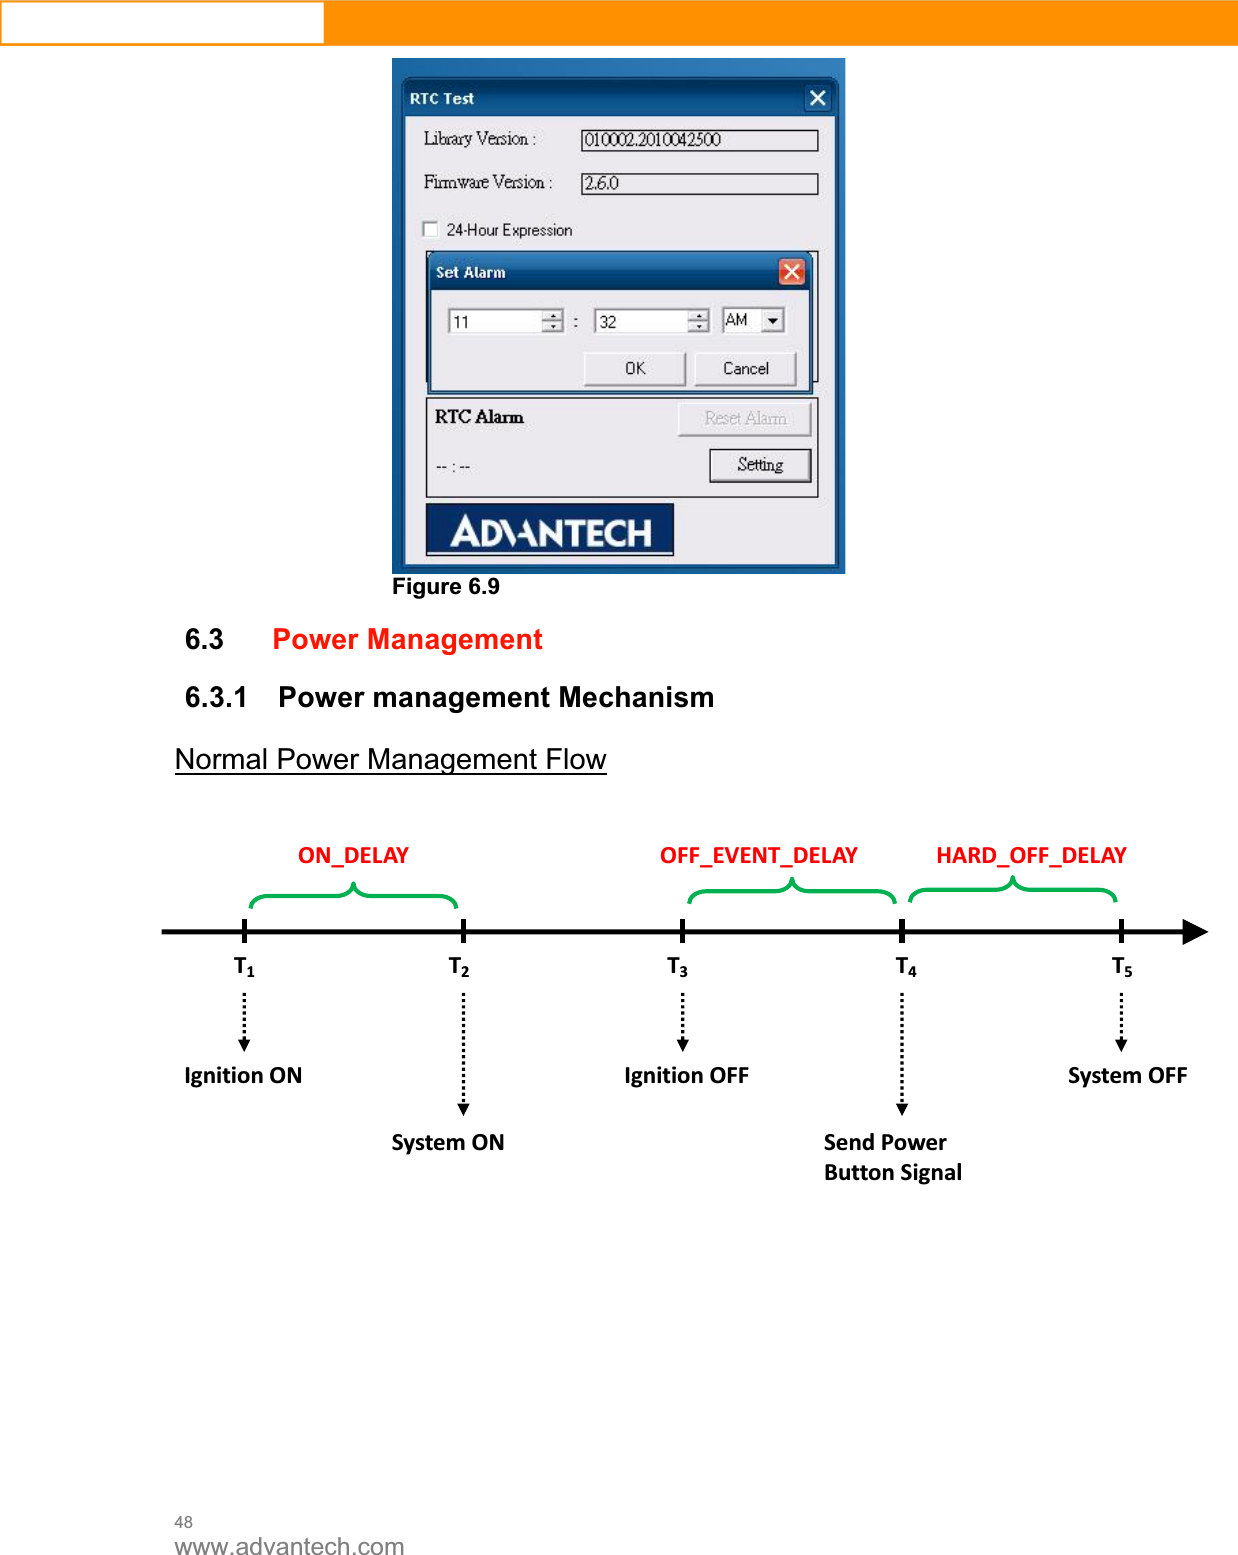 48www.advantech.comFigure 6.9 6.3Power Management   6.3.1  Power management MechanismNormal Power Management FlowT1T2T3T4T5IgnitionONSystemONIgnitionOFFSendPowerButtonSignalSystemOFFON_DELAYOFF_EVENT_DELAY HARD_OFF_DELAY